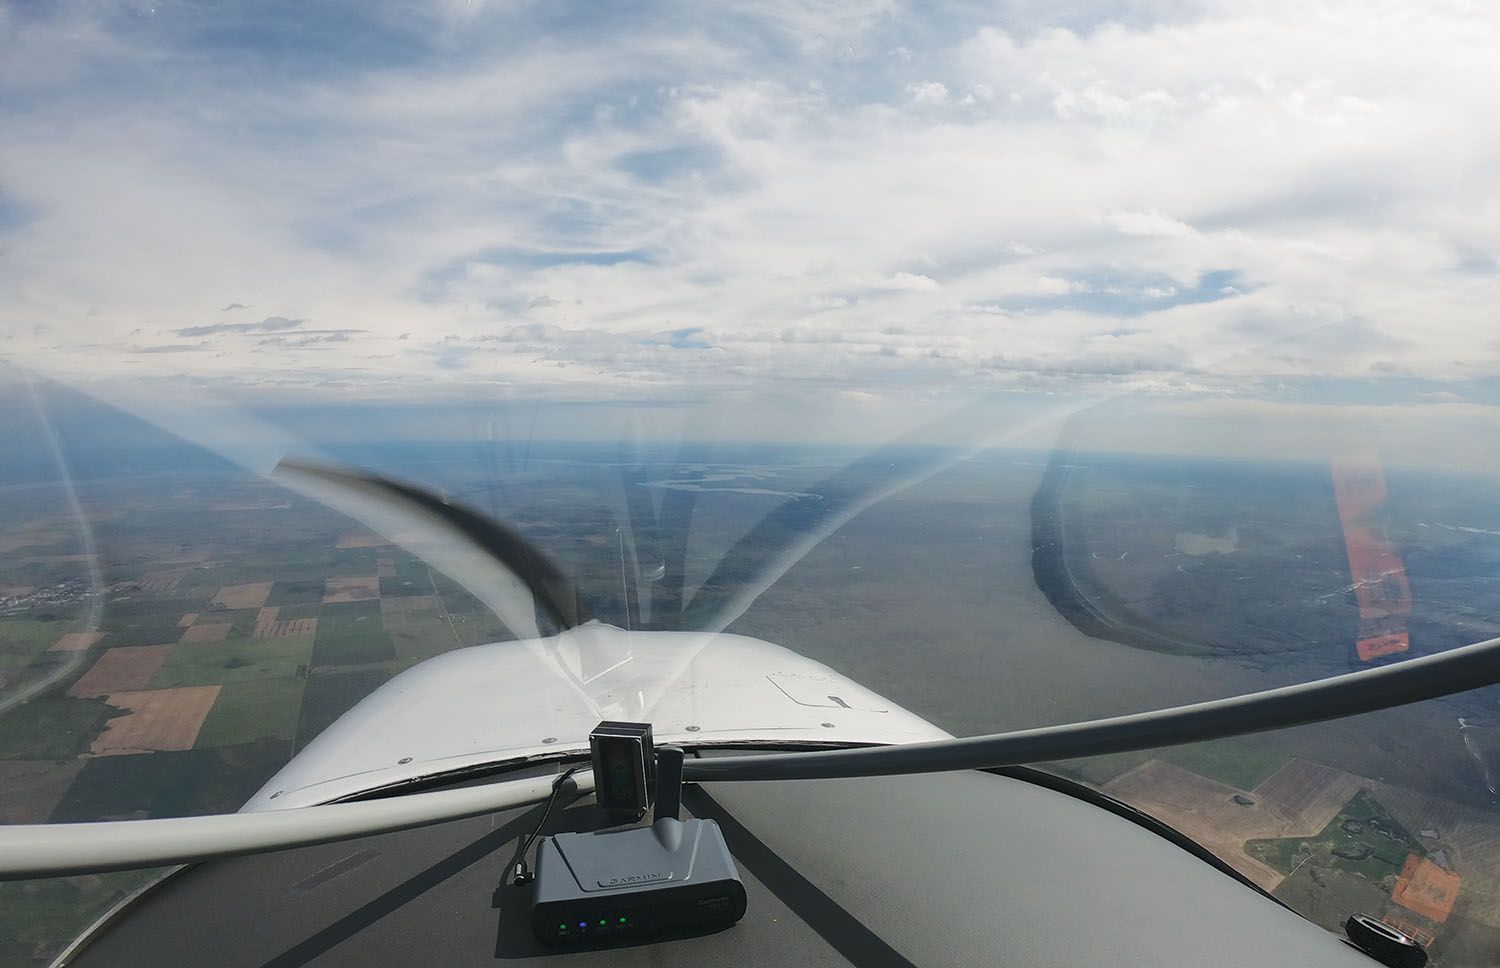 12 Steps For The Perfect Instrument Cockpit Check, Every Time You Fly IFR